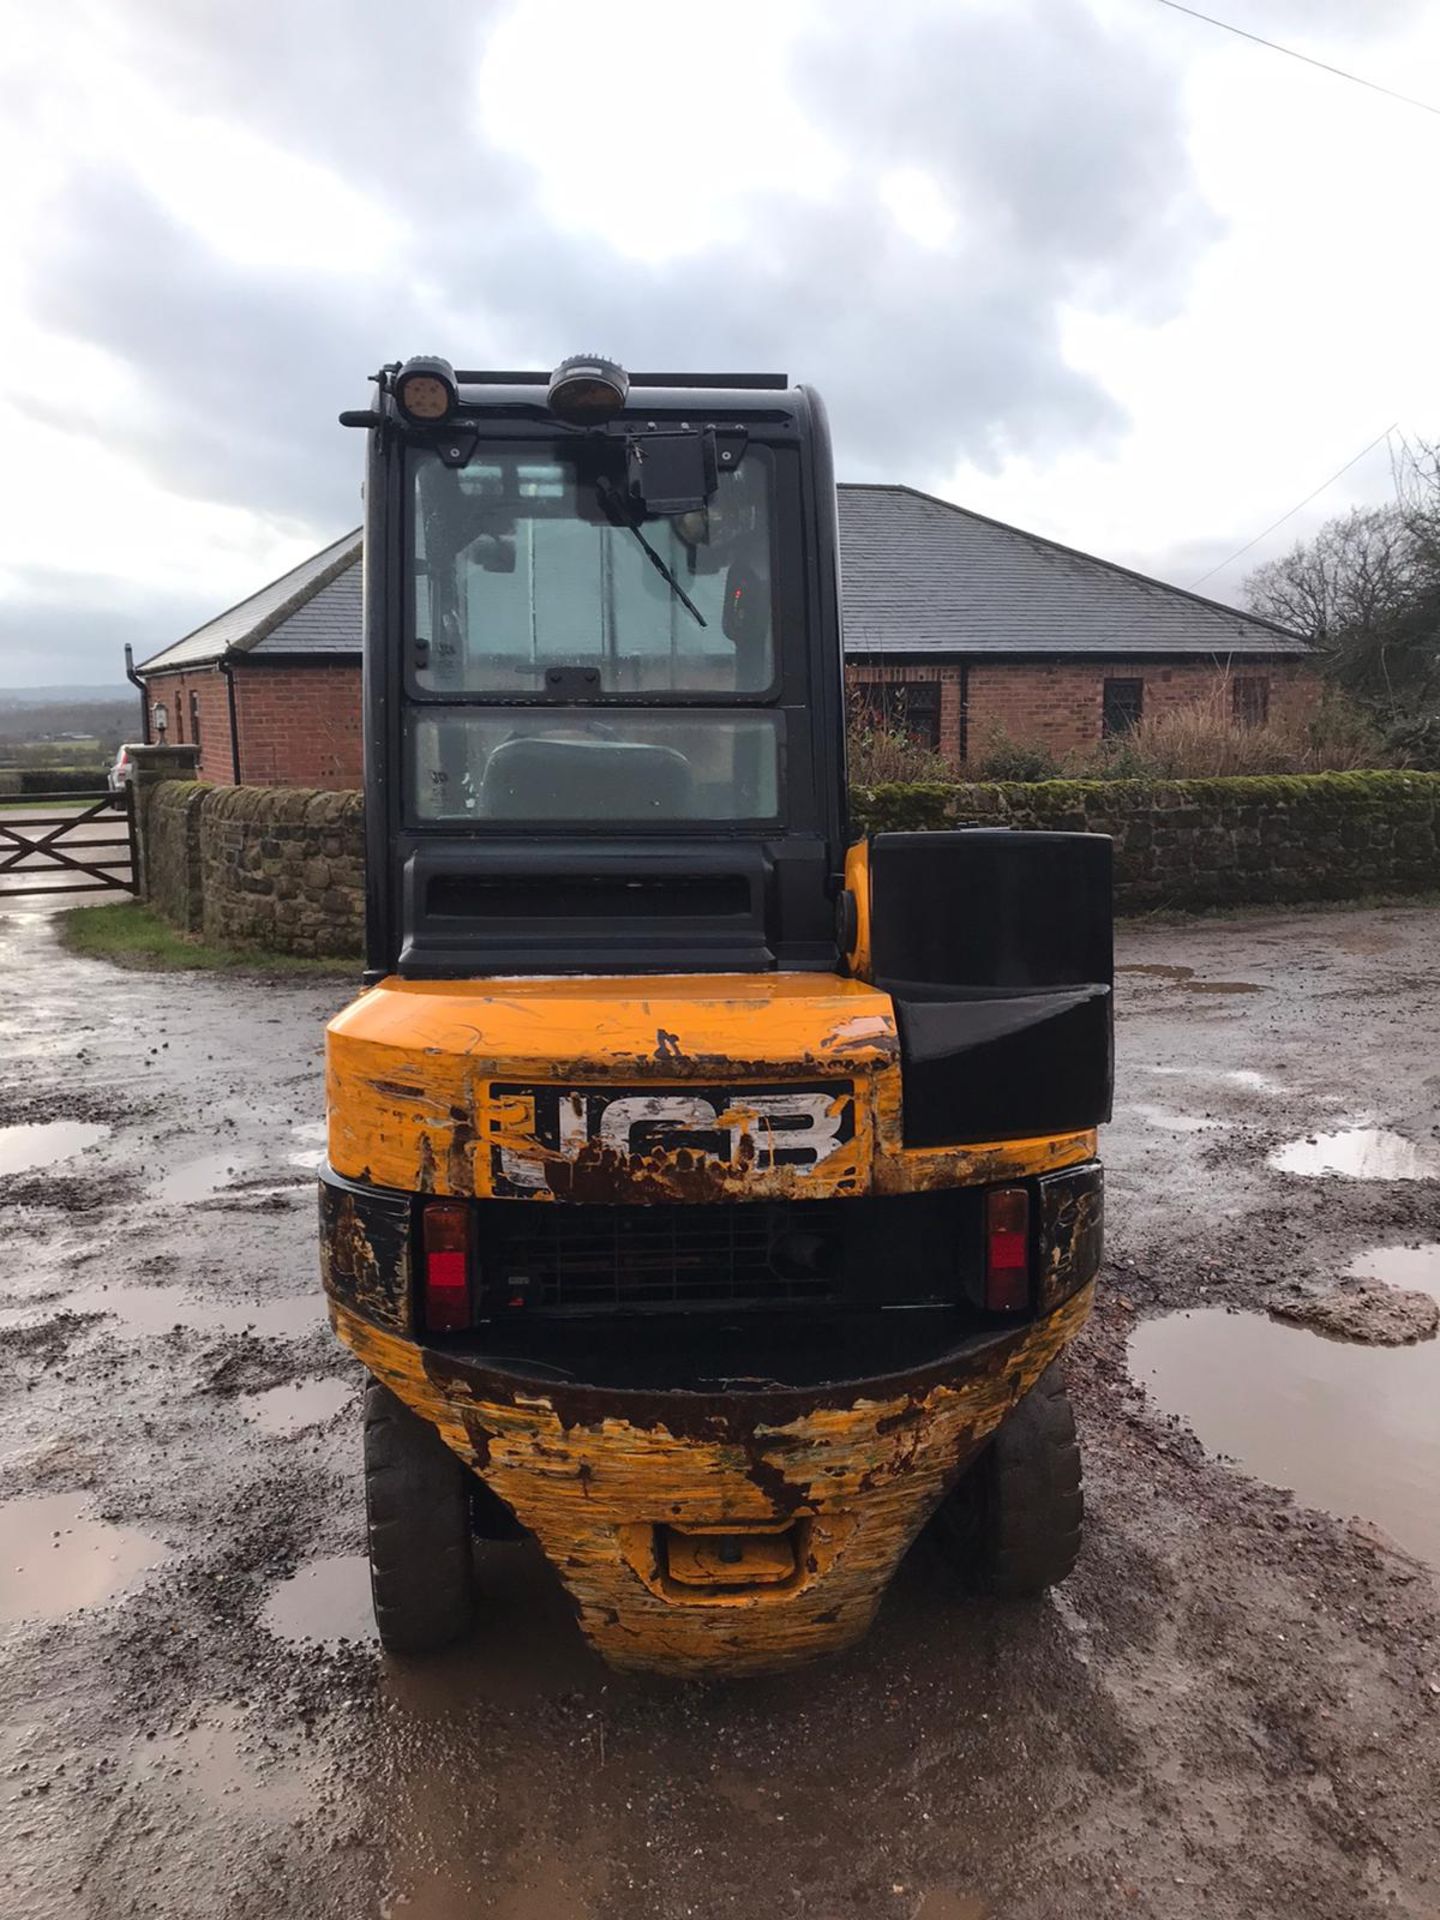 JCB TLT 30 TELETRUK, YEAR 2014, POWER 35.6 KW, WEIGHT 4900 KG, RUNS, WORKS AND LIFTS *PLUS VAT* - Image 5 of 6